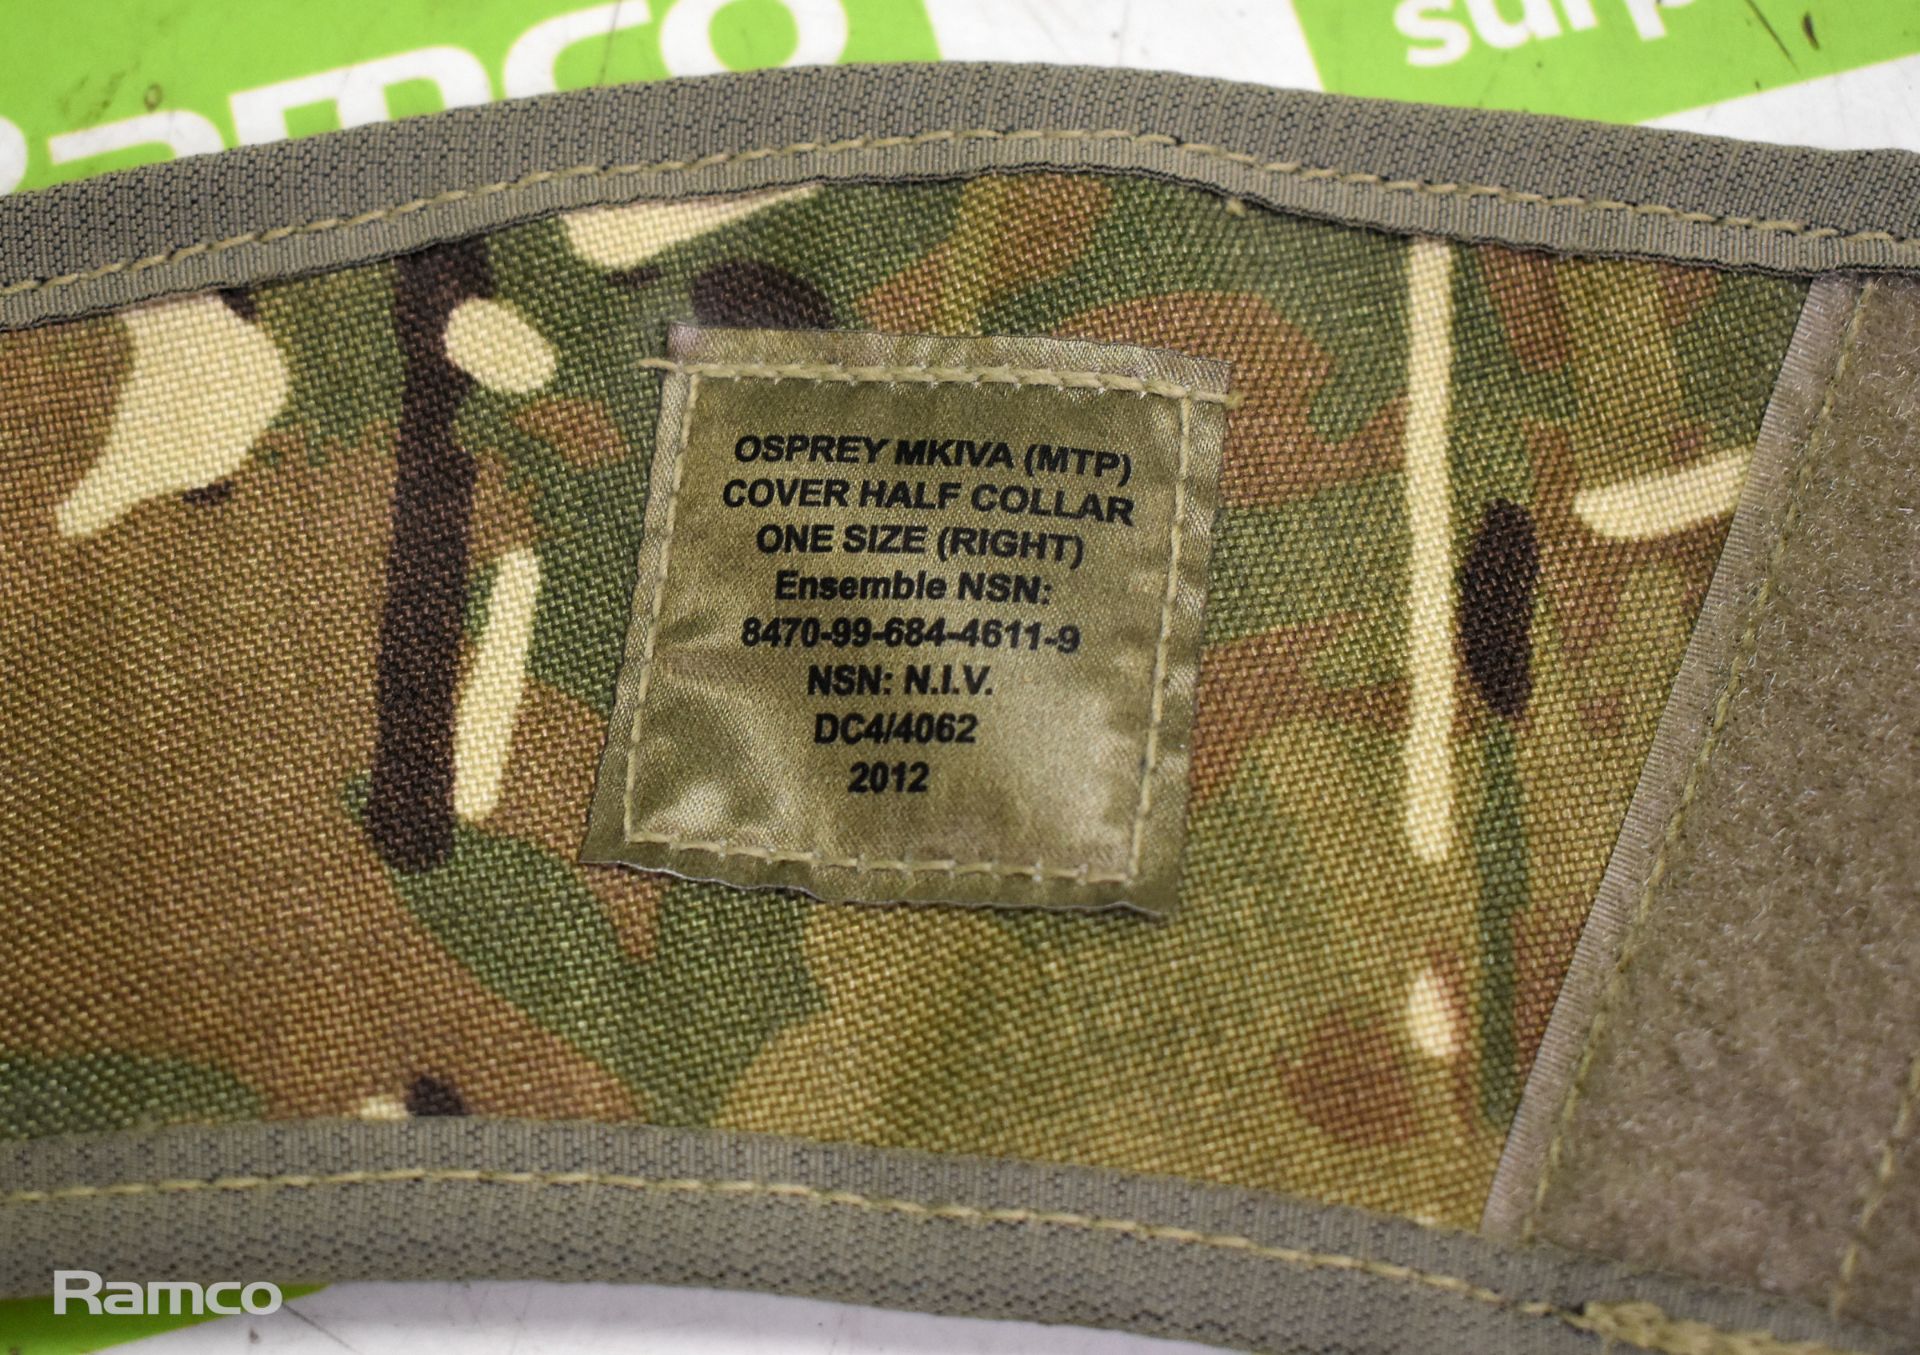 50x British Army MTP Osprey MK IVA half collar covers - mixed grades and sizes - Image 3 of 5